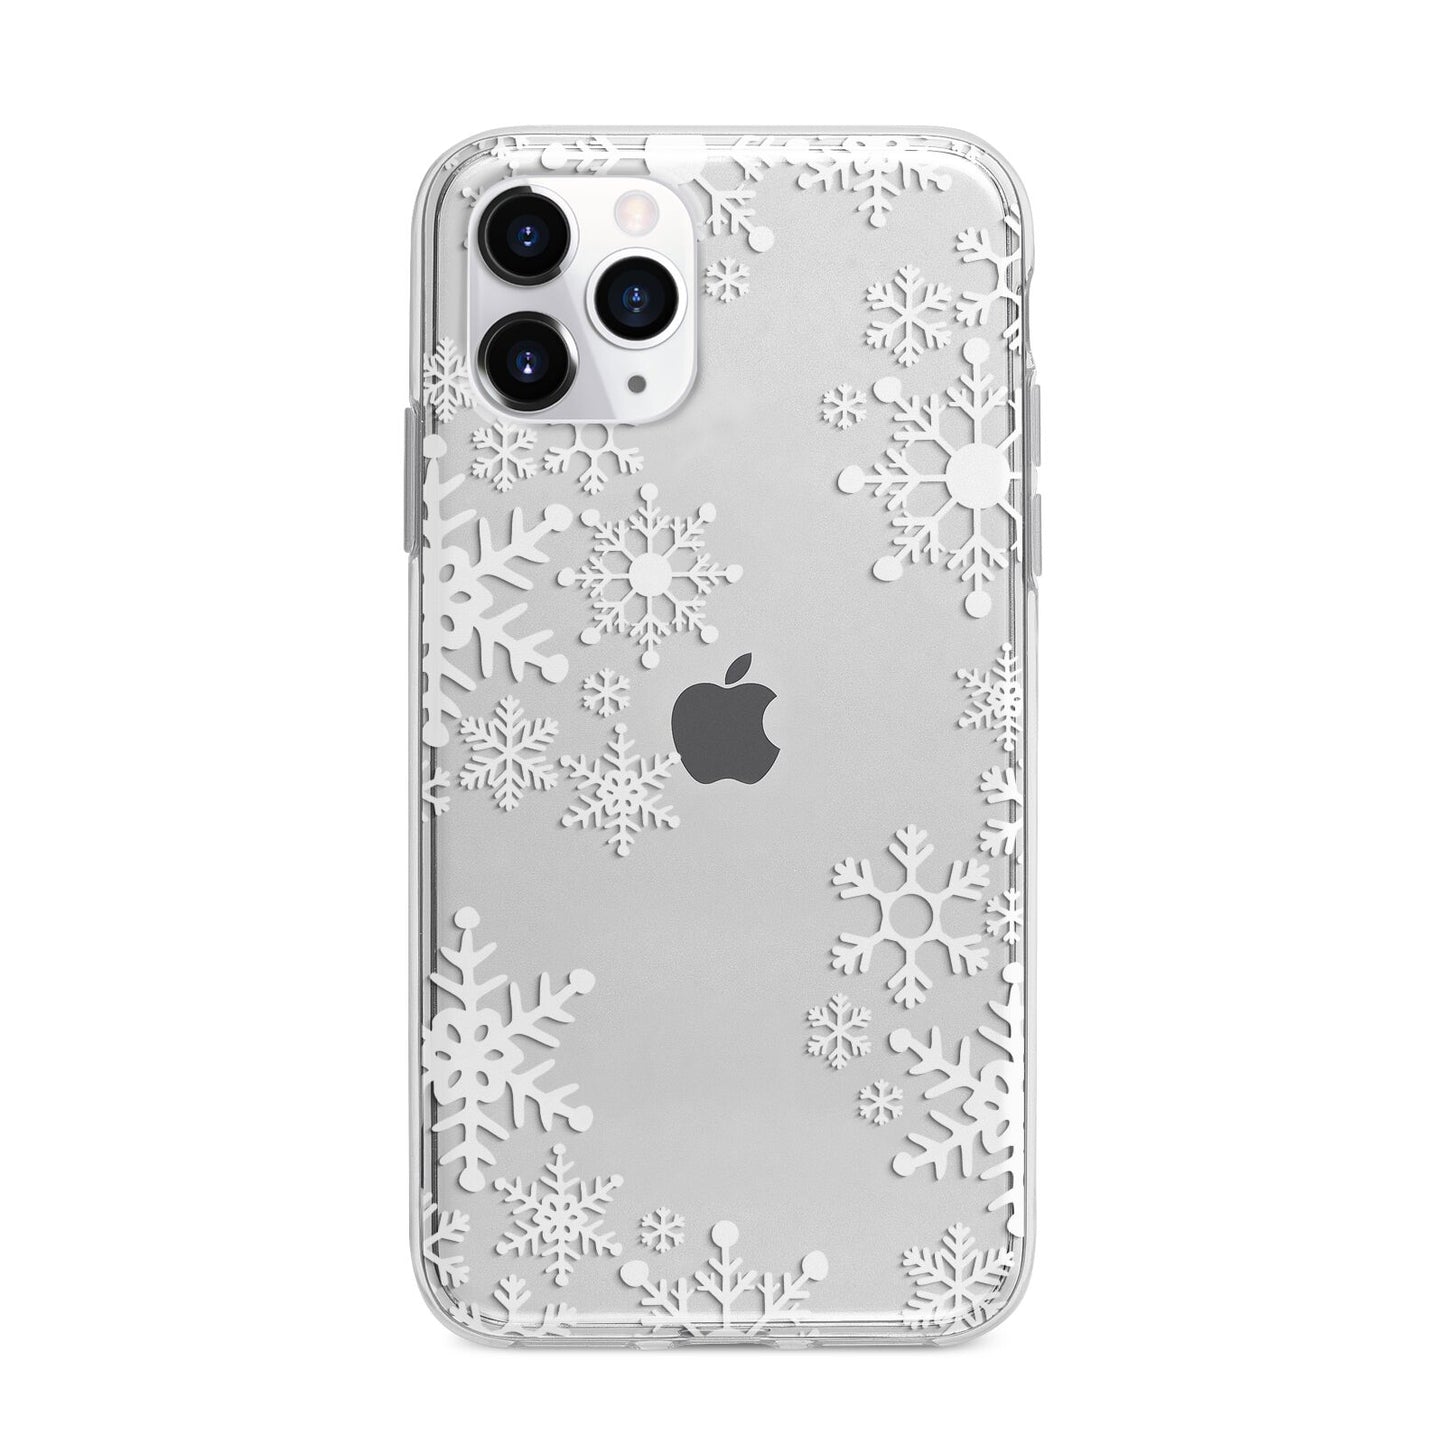 Snowflake Apple iPhone 11 Pro in Silver with Bumper Case